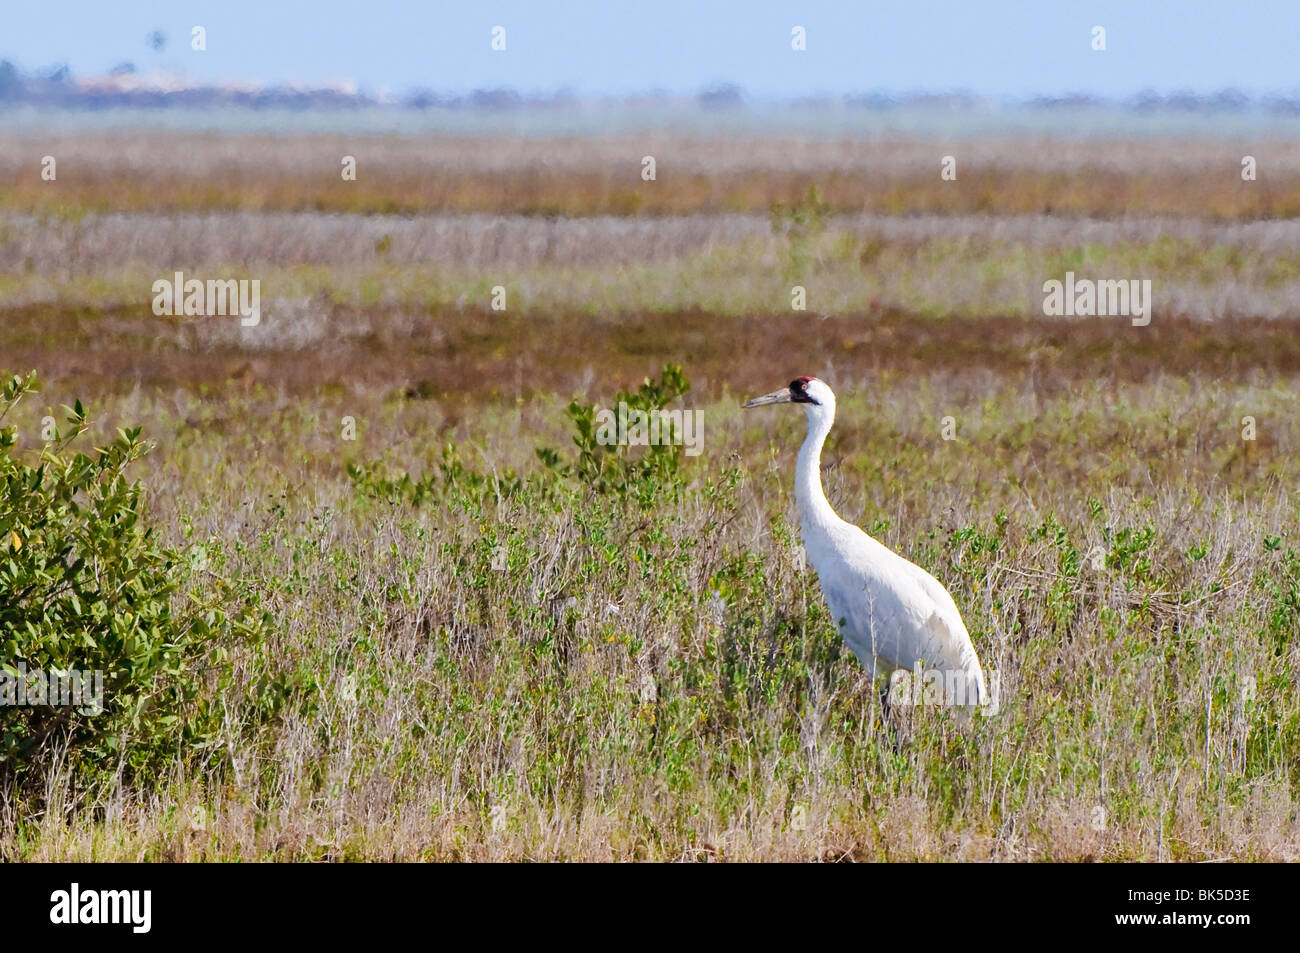 Whooping crane, Texas, United States of America, North America Stock Photo